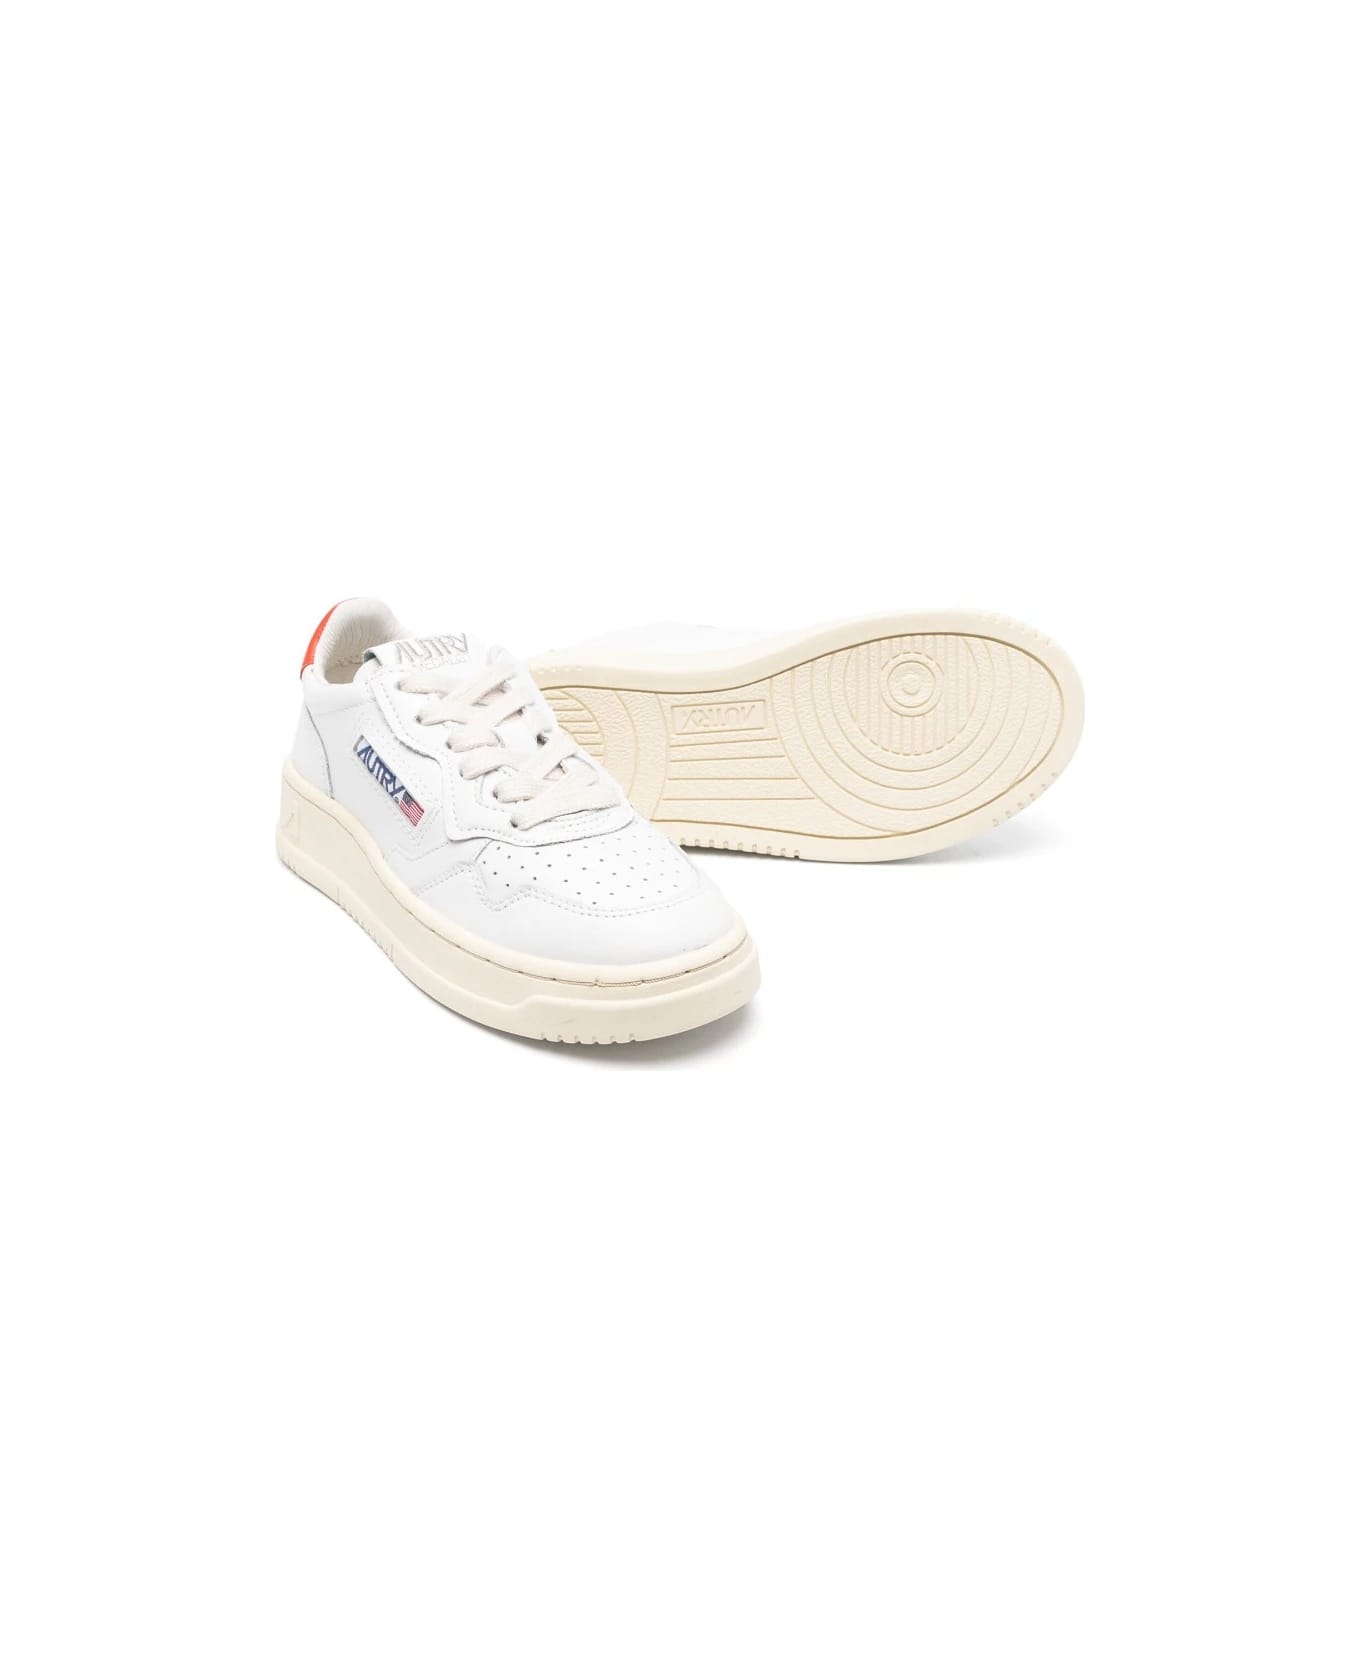 Autry White And Red Medalist Low Sneakers - Bianco